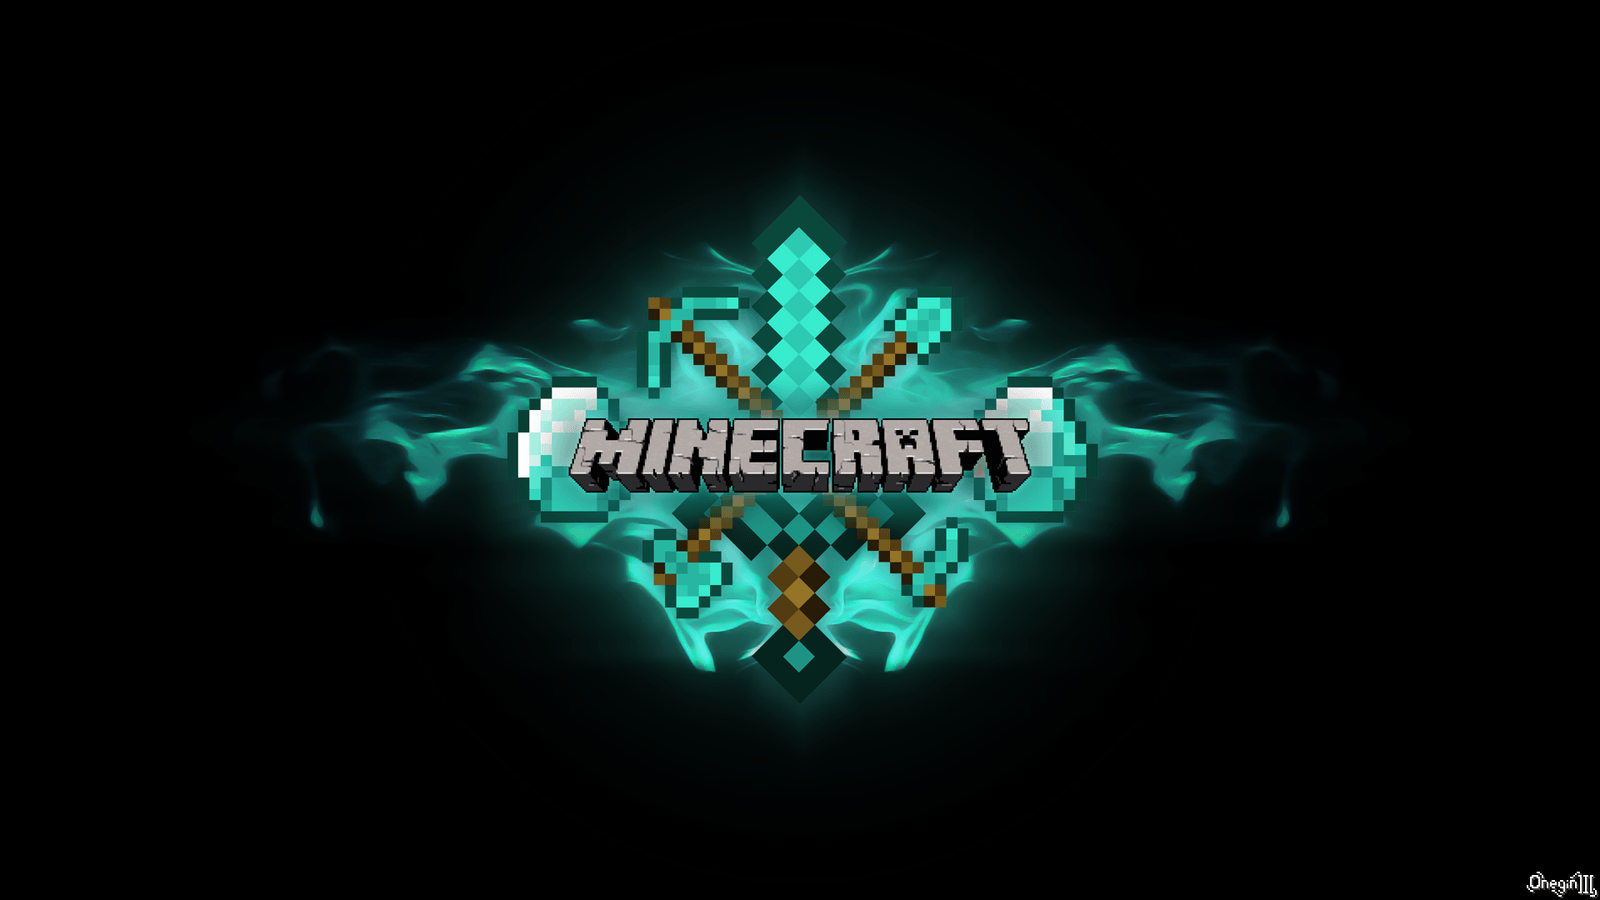 Minecraft Image Wallpapers - Wallpaper Cave